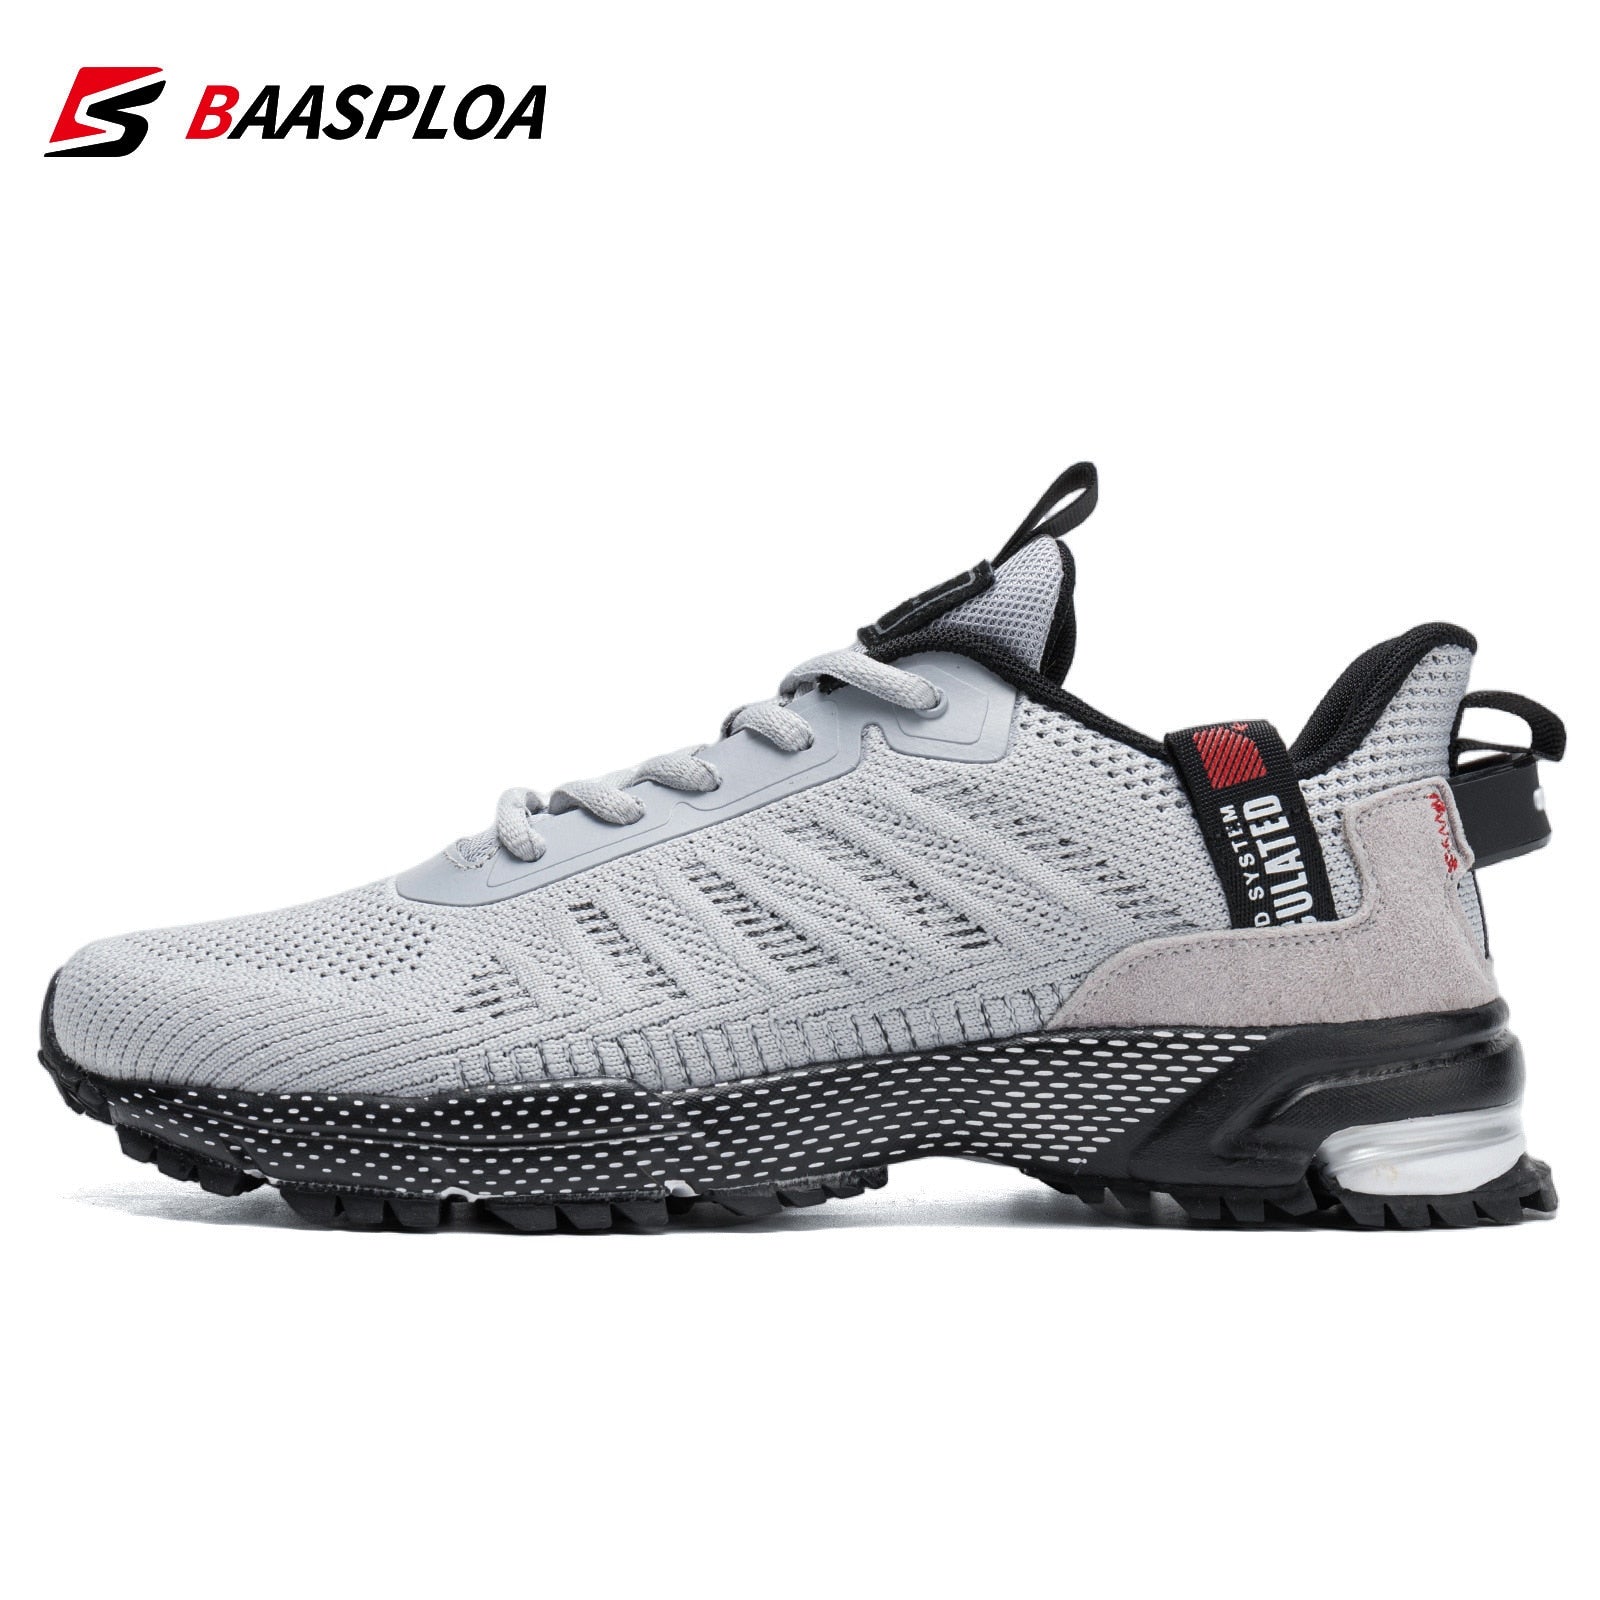 Buy a01-114101-qh Baasploa Professional Lightweight Running Shoes for Men